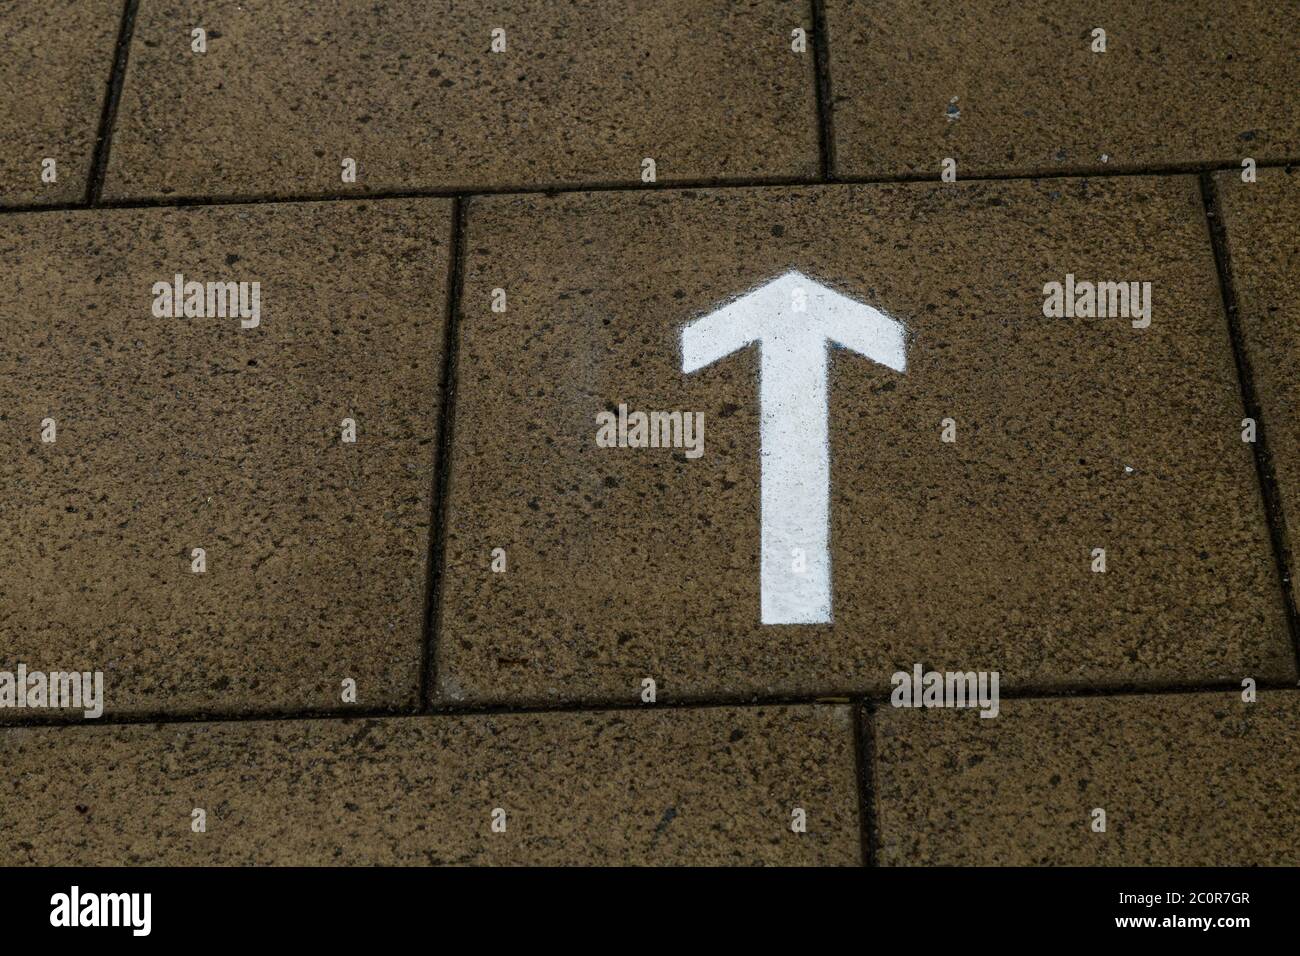 A painted white arrow on a pavement showing a one way system for pedestrians. Stock Photo